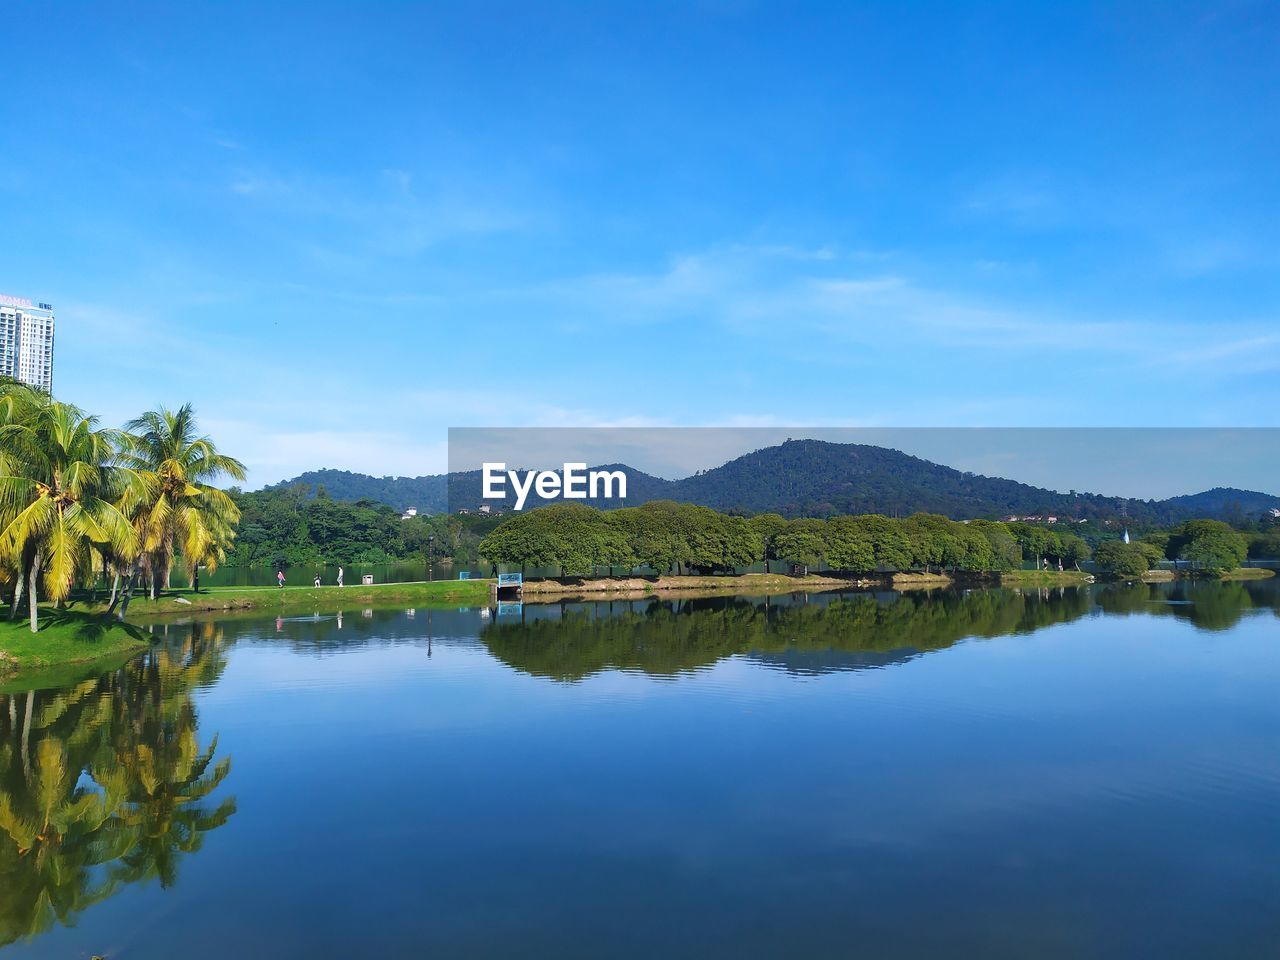 water, reflection, sky, lake, beauty in nature, tree, scenics - nature, nature, tranquility, plant, body of water, mountain, environment, blue, tranquil scene, tropical climate, landscape, no people, travel destinations, reservoir, land, palm tree, travel, outdoors, cloud, day, idyllic, tourism, mountain range, non-urban scene, trip, green, vacation, holiday, forest